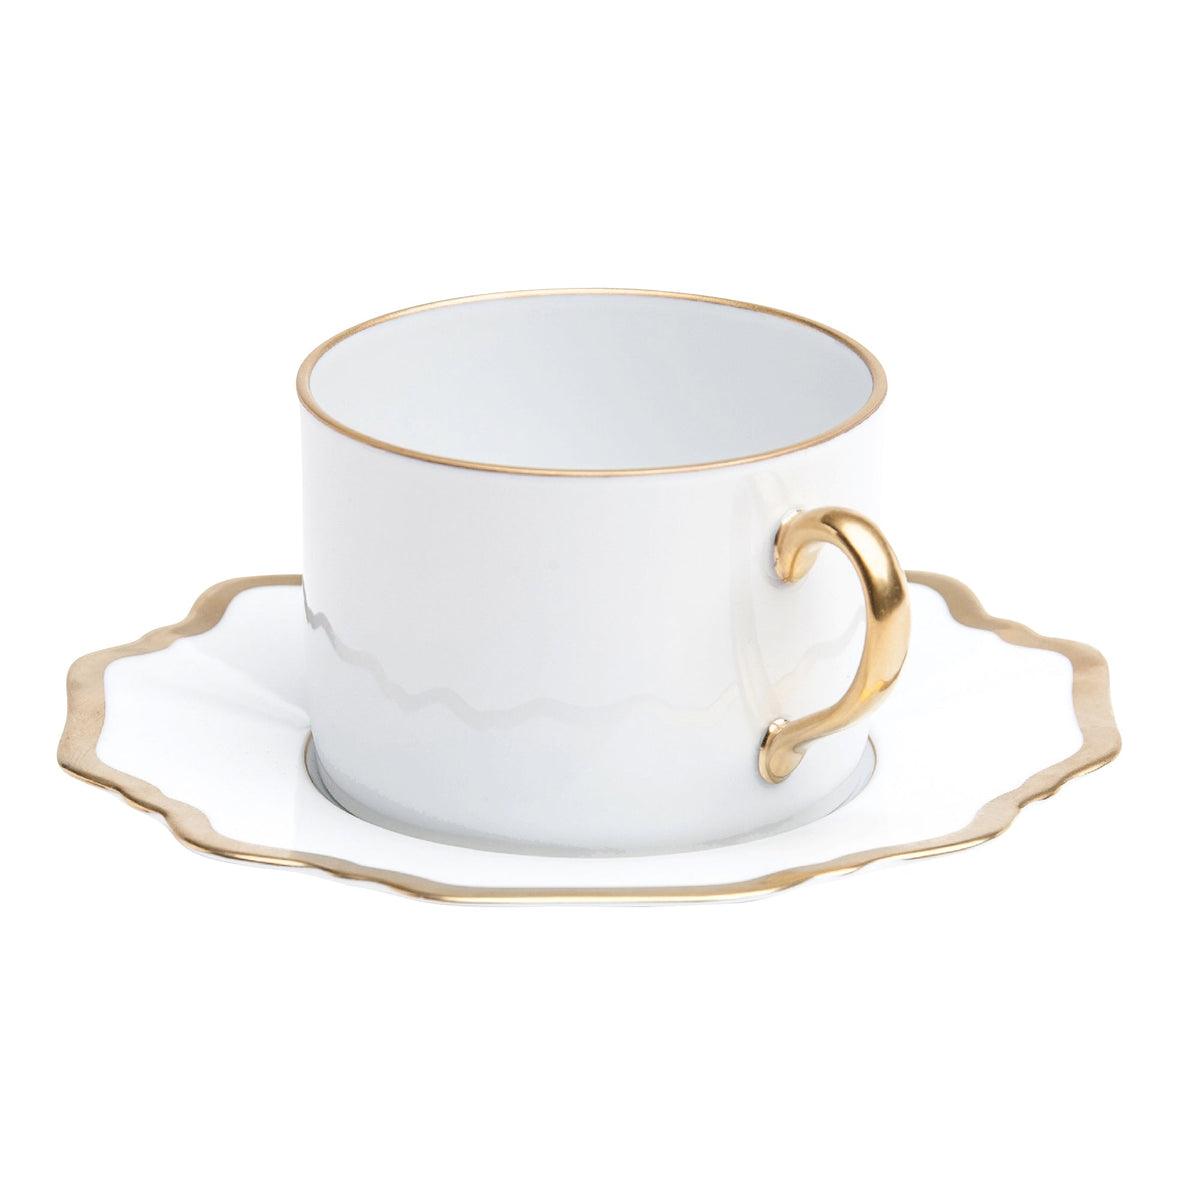 Antique White and Gold Tea Cup and Saucer